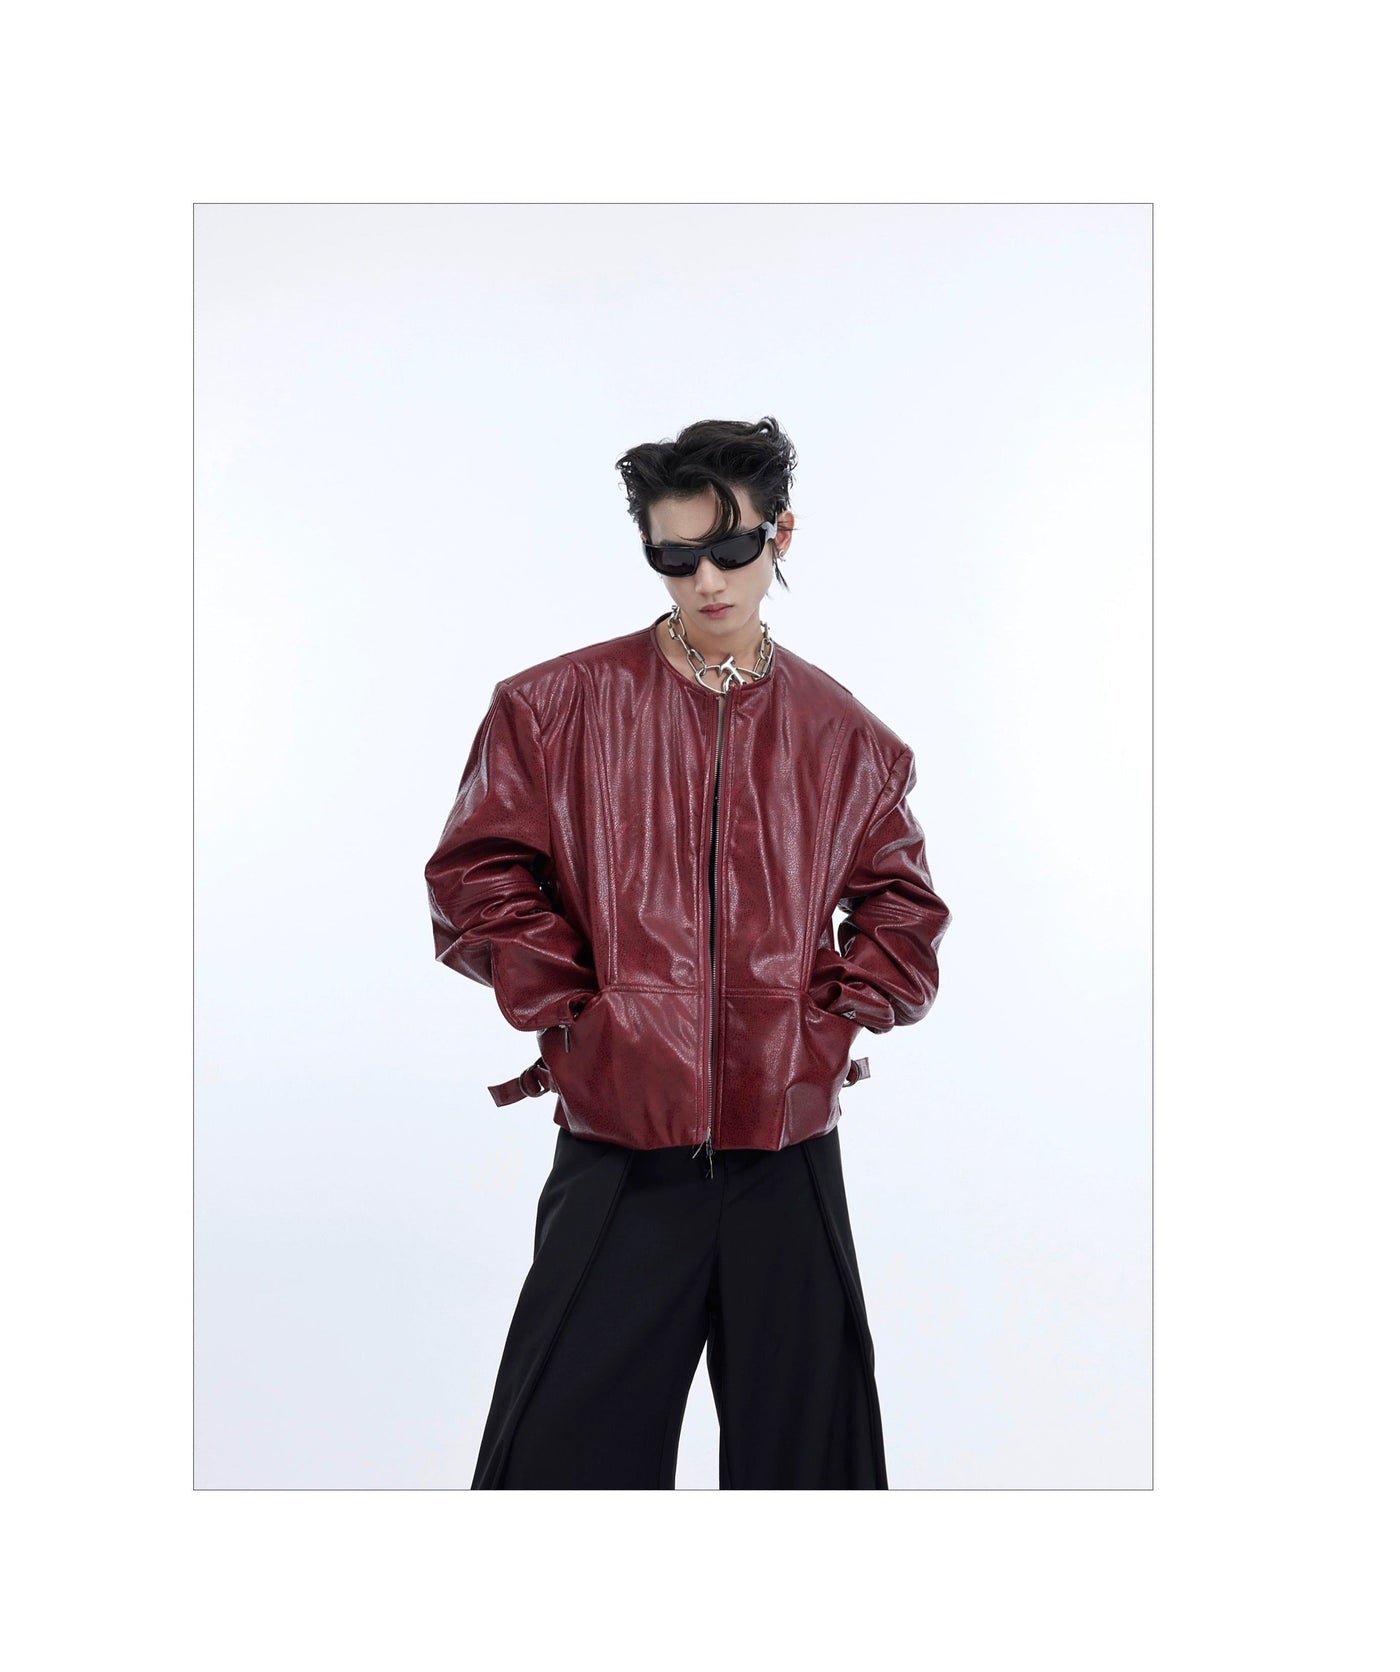 Textured and Zipped PU Leather Jacket Korean Street Fashion Jacket By Argue Culture Shop Online at OH Vault